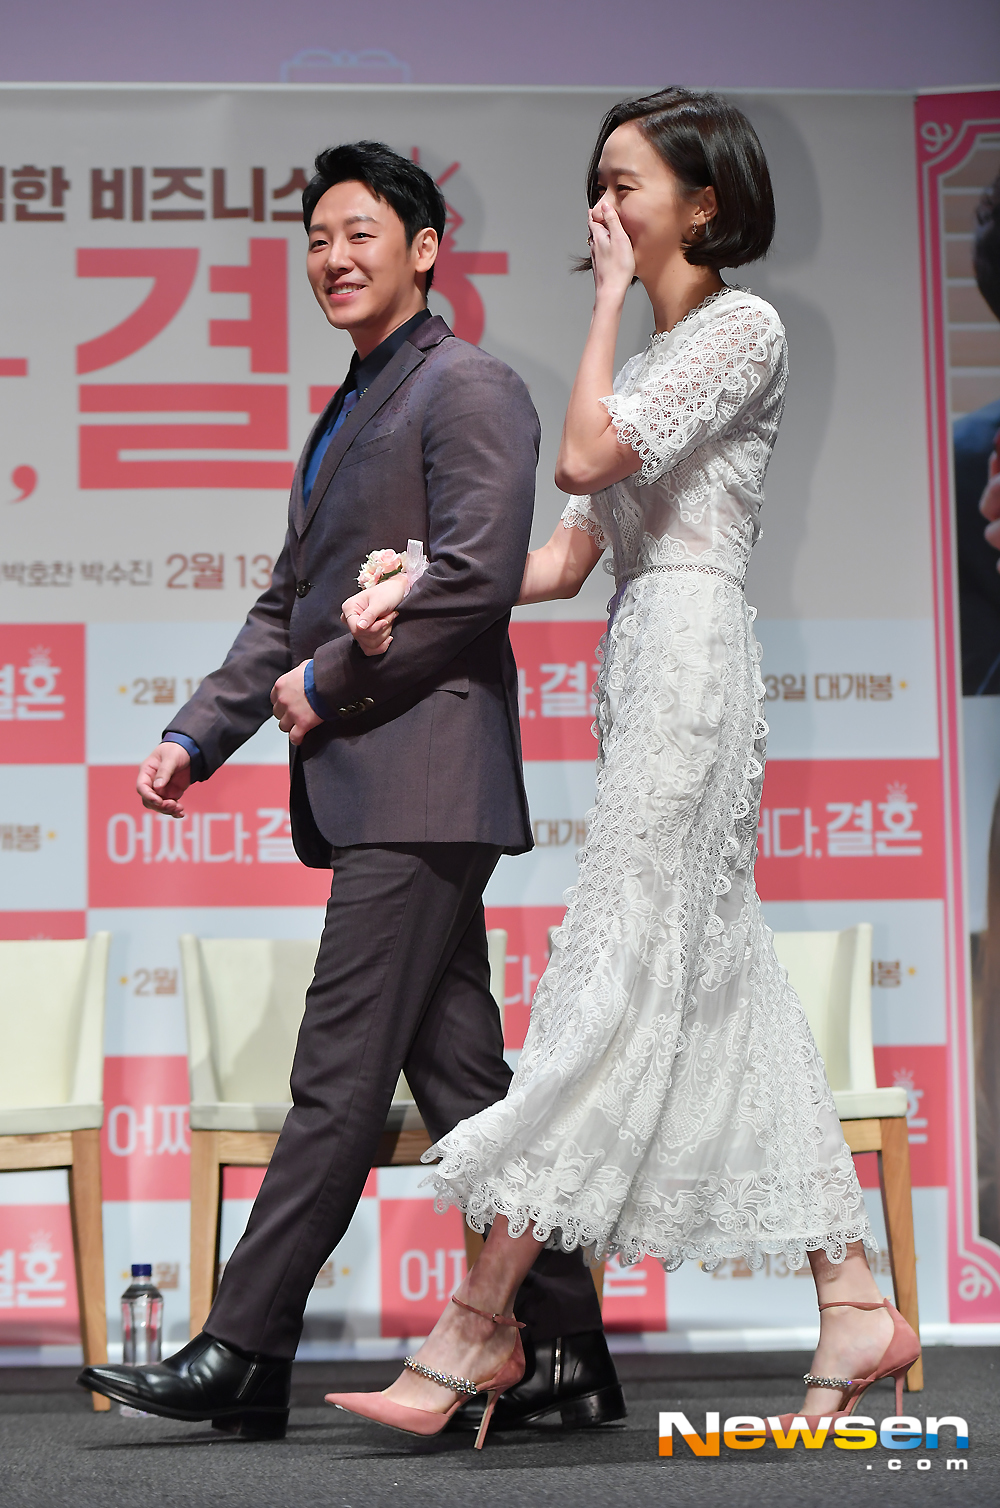 The movie What a Marriage production briefing session was held at CGV Apgujeong branch in Gangnam-gu, Seoul on January 9Ko Sung-hee Kim Dong-book is entering the day.Actor Kim Dong-wook Ko Sung-hee Hwang Bora Park Ho-chan, director Park Soo-jin, attended the production briefing session.